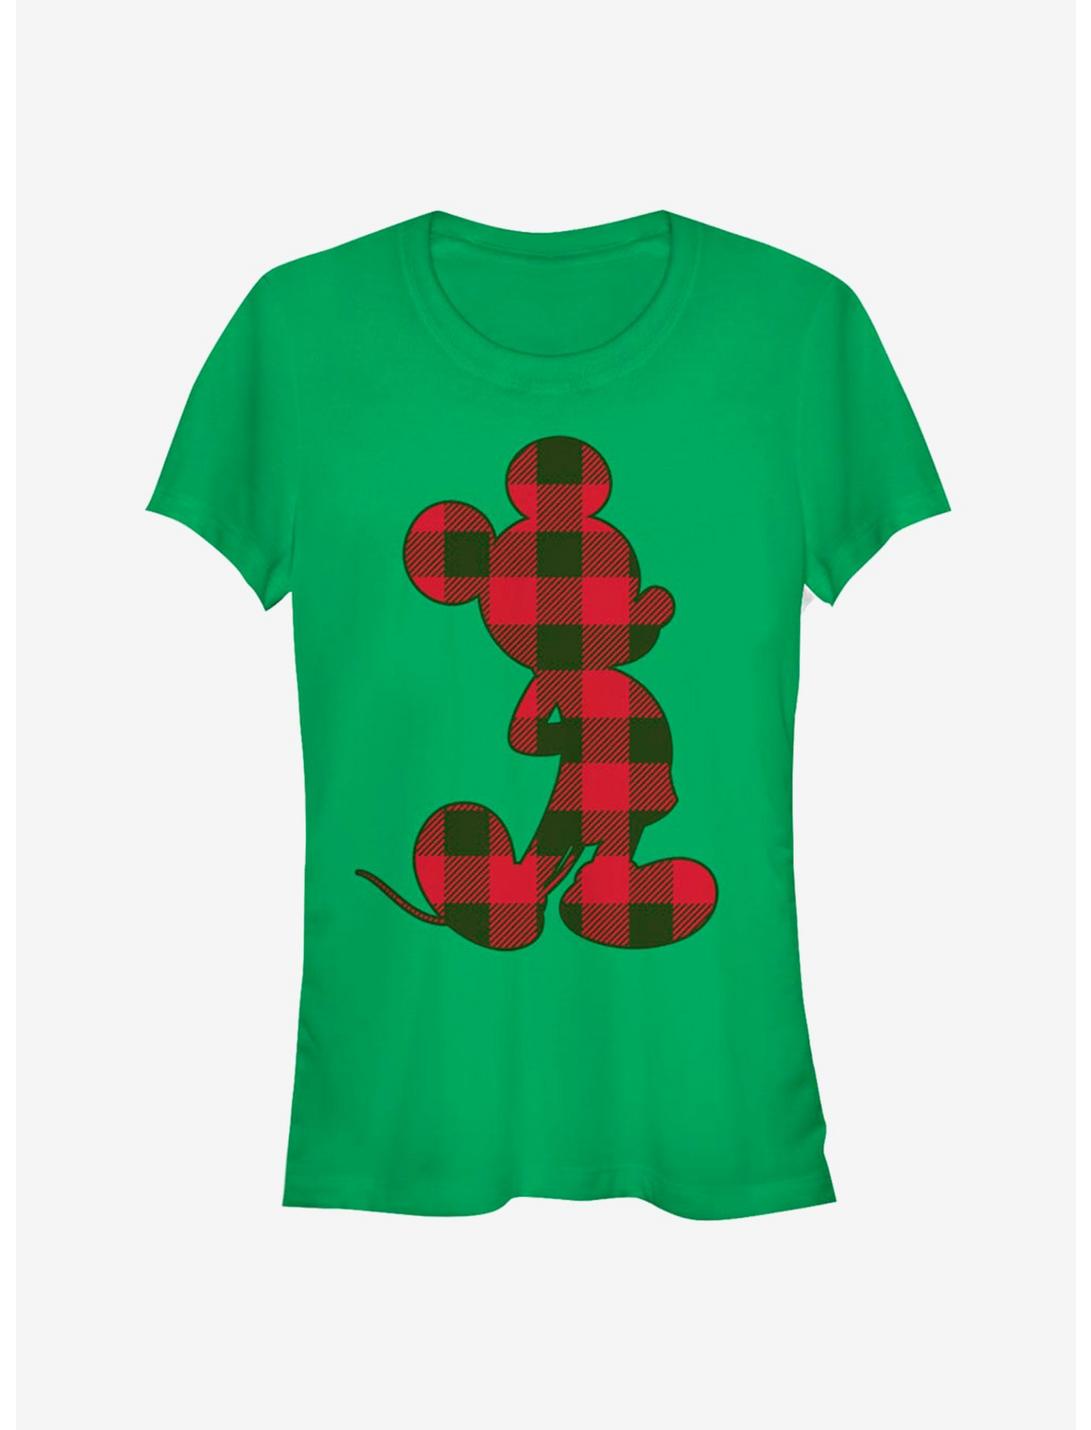 Disney Mickey Mouse Holiday Plaid Outline Classic Girls T-Shirt, KELLY, hi-res